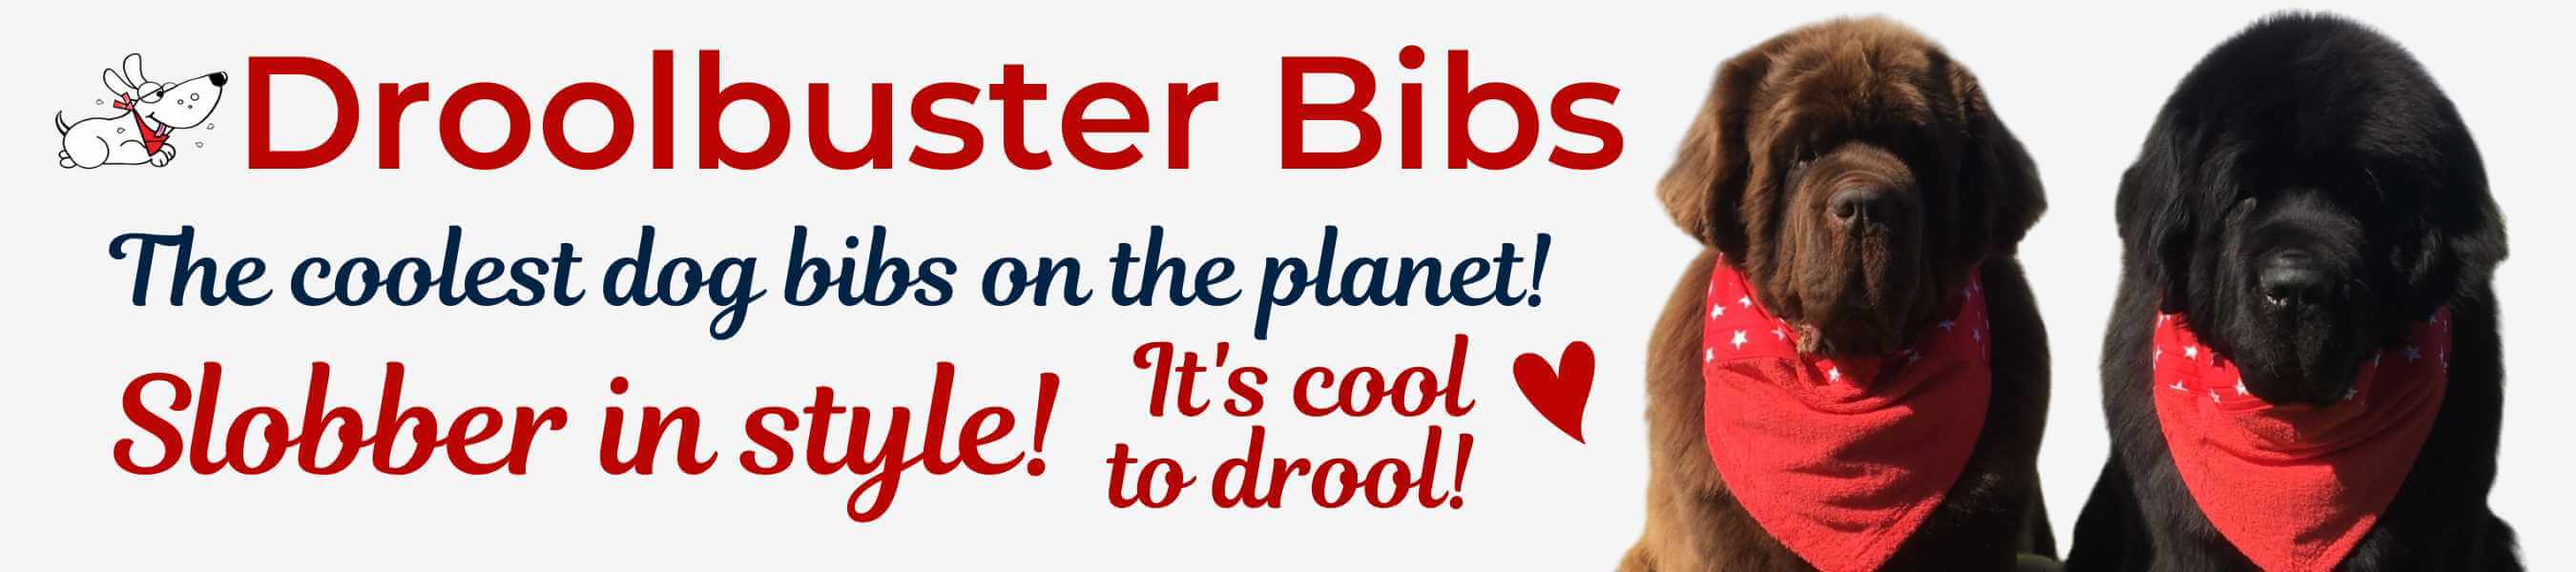 droolbuster dog bibs for dogs that drool / sizes to fit giant breeds